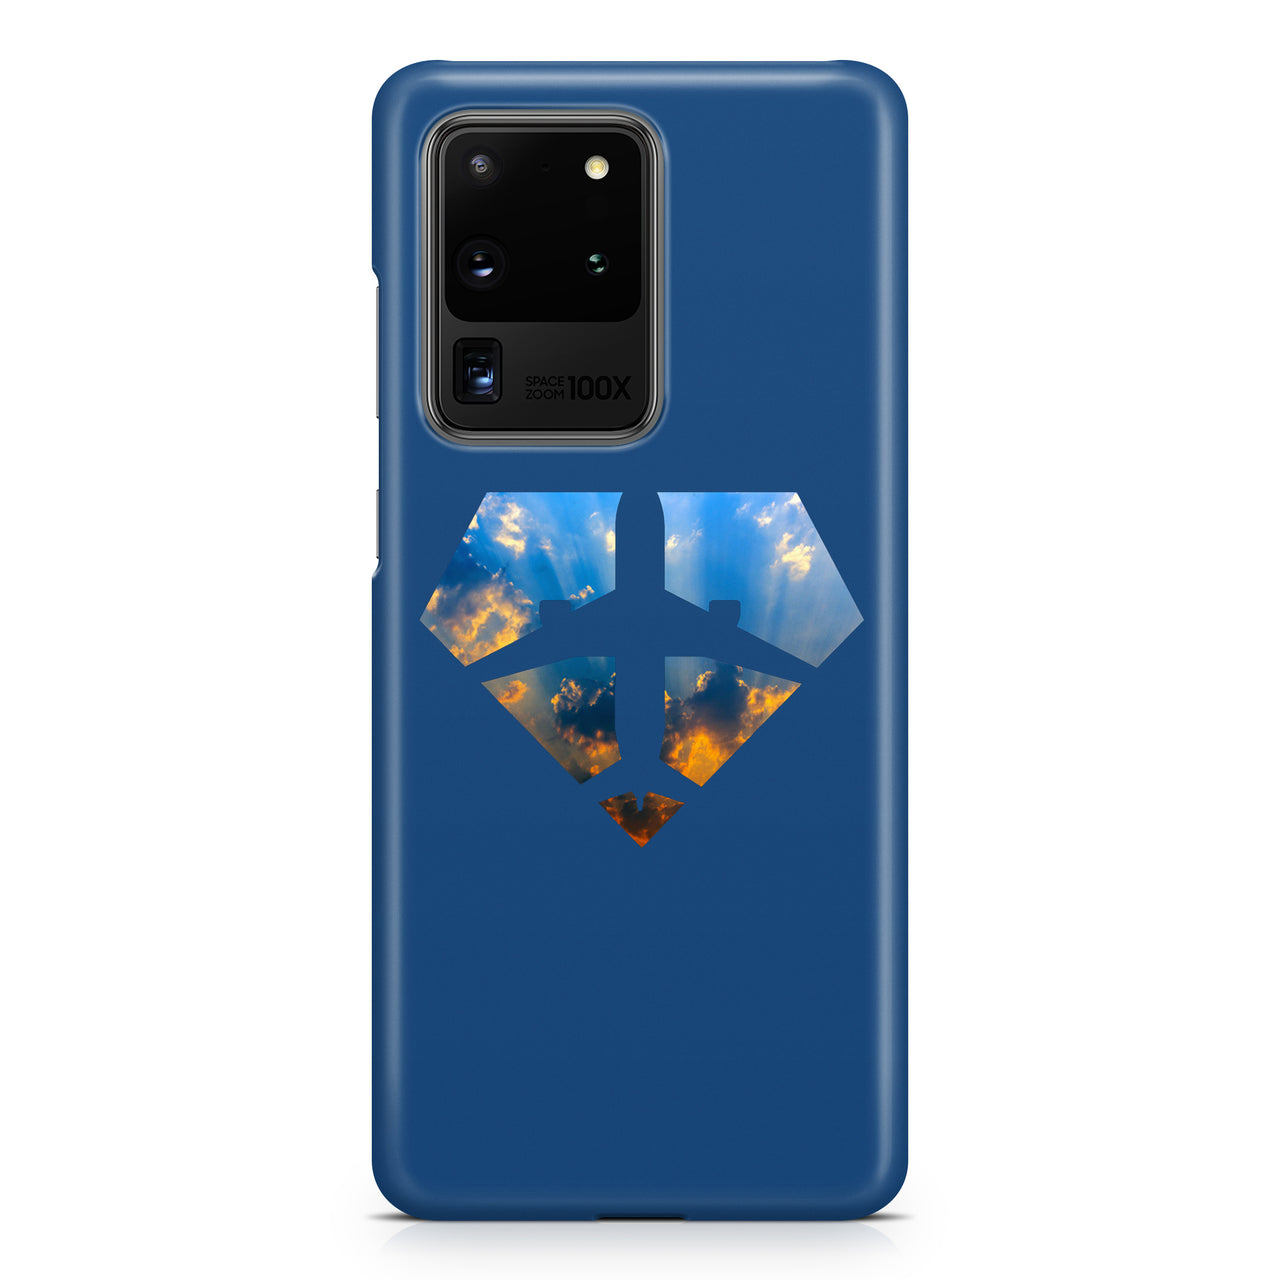 Supermen of The Skies (Sunrise) Samsung A Cases